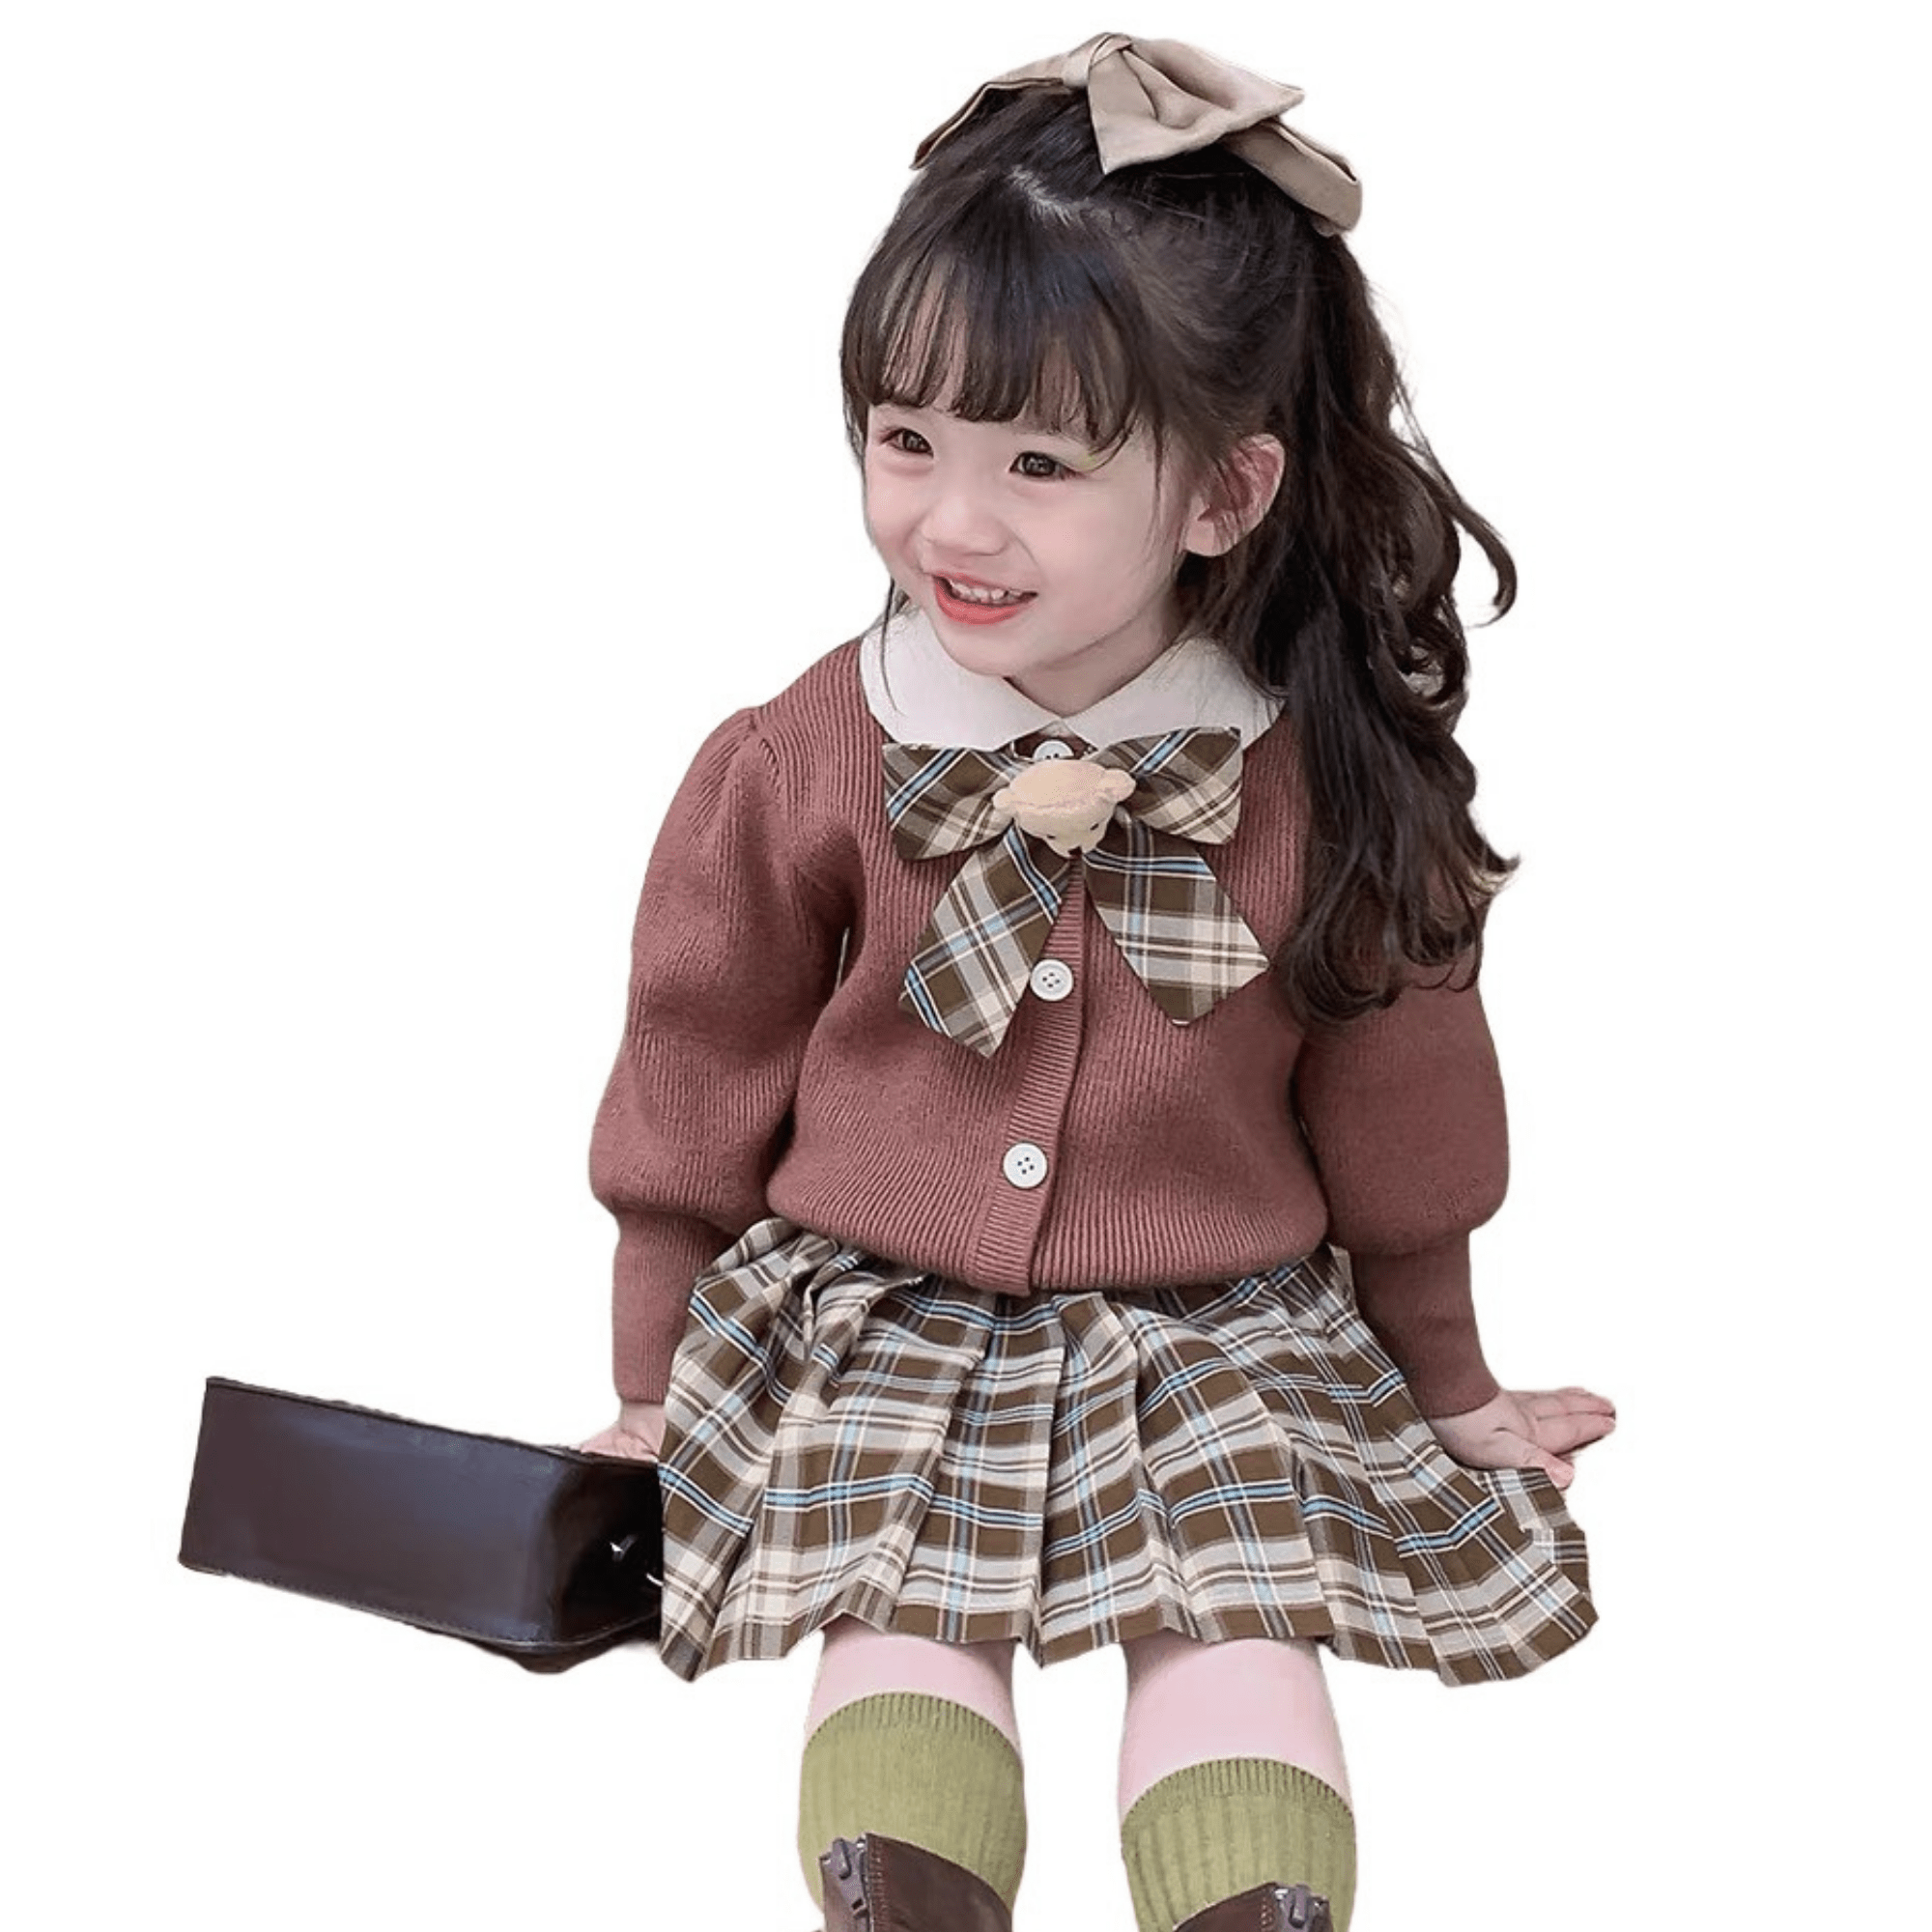 Kids Clothes Girls Customized Service 100% Wool Dresses New Arrival Each One In Opp Bag Made In Vietnam Manufacturer 1